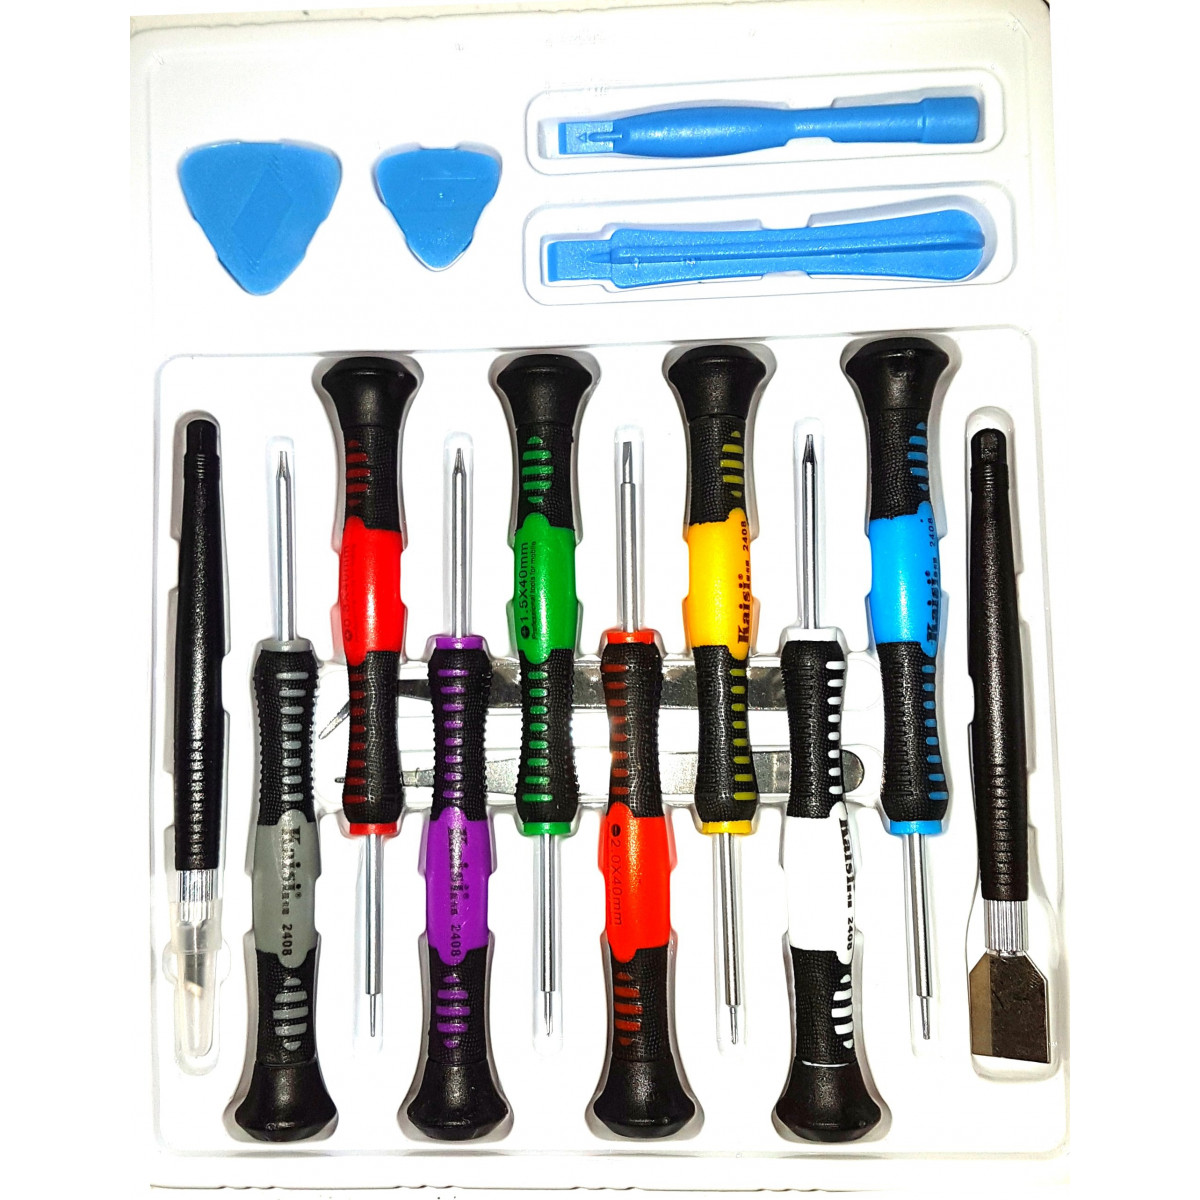 Set Screwdrivers Accessories Accuracy Repair Smartphone Tablet PC Electronics